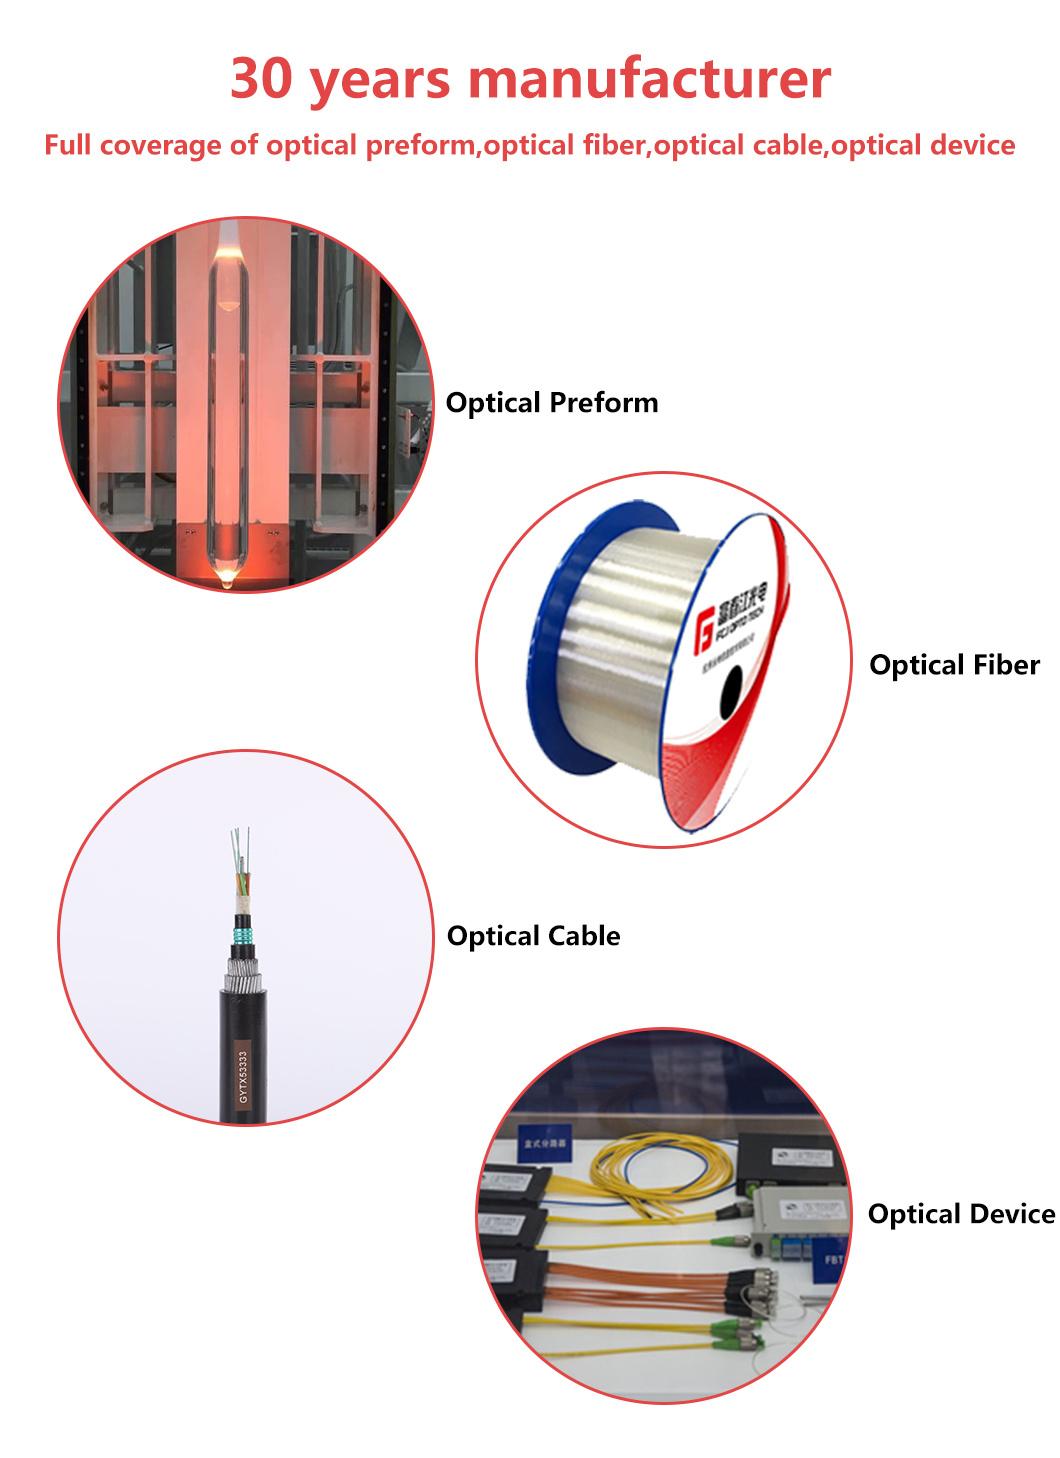 FTTH Bow-Type Steel Type Drop Fiber Optic Cable GJXFH (V) Stripped, 1/2/4core Singlemode G657A1 G657A2 Fiber Cable